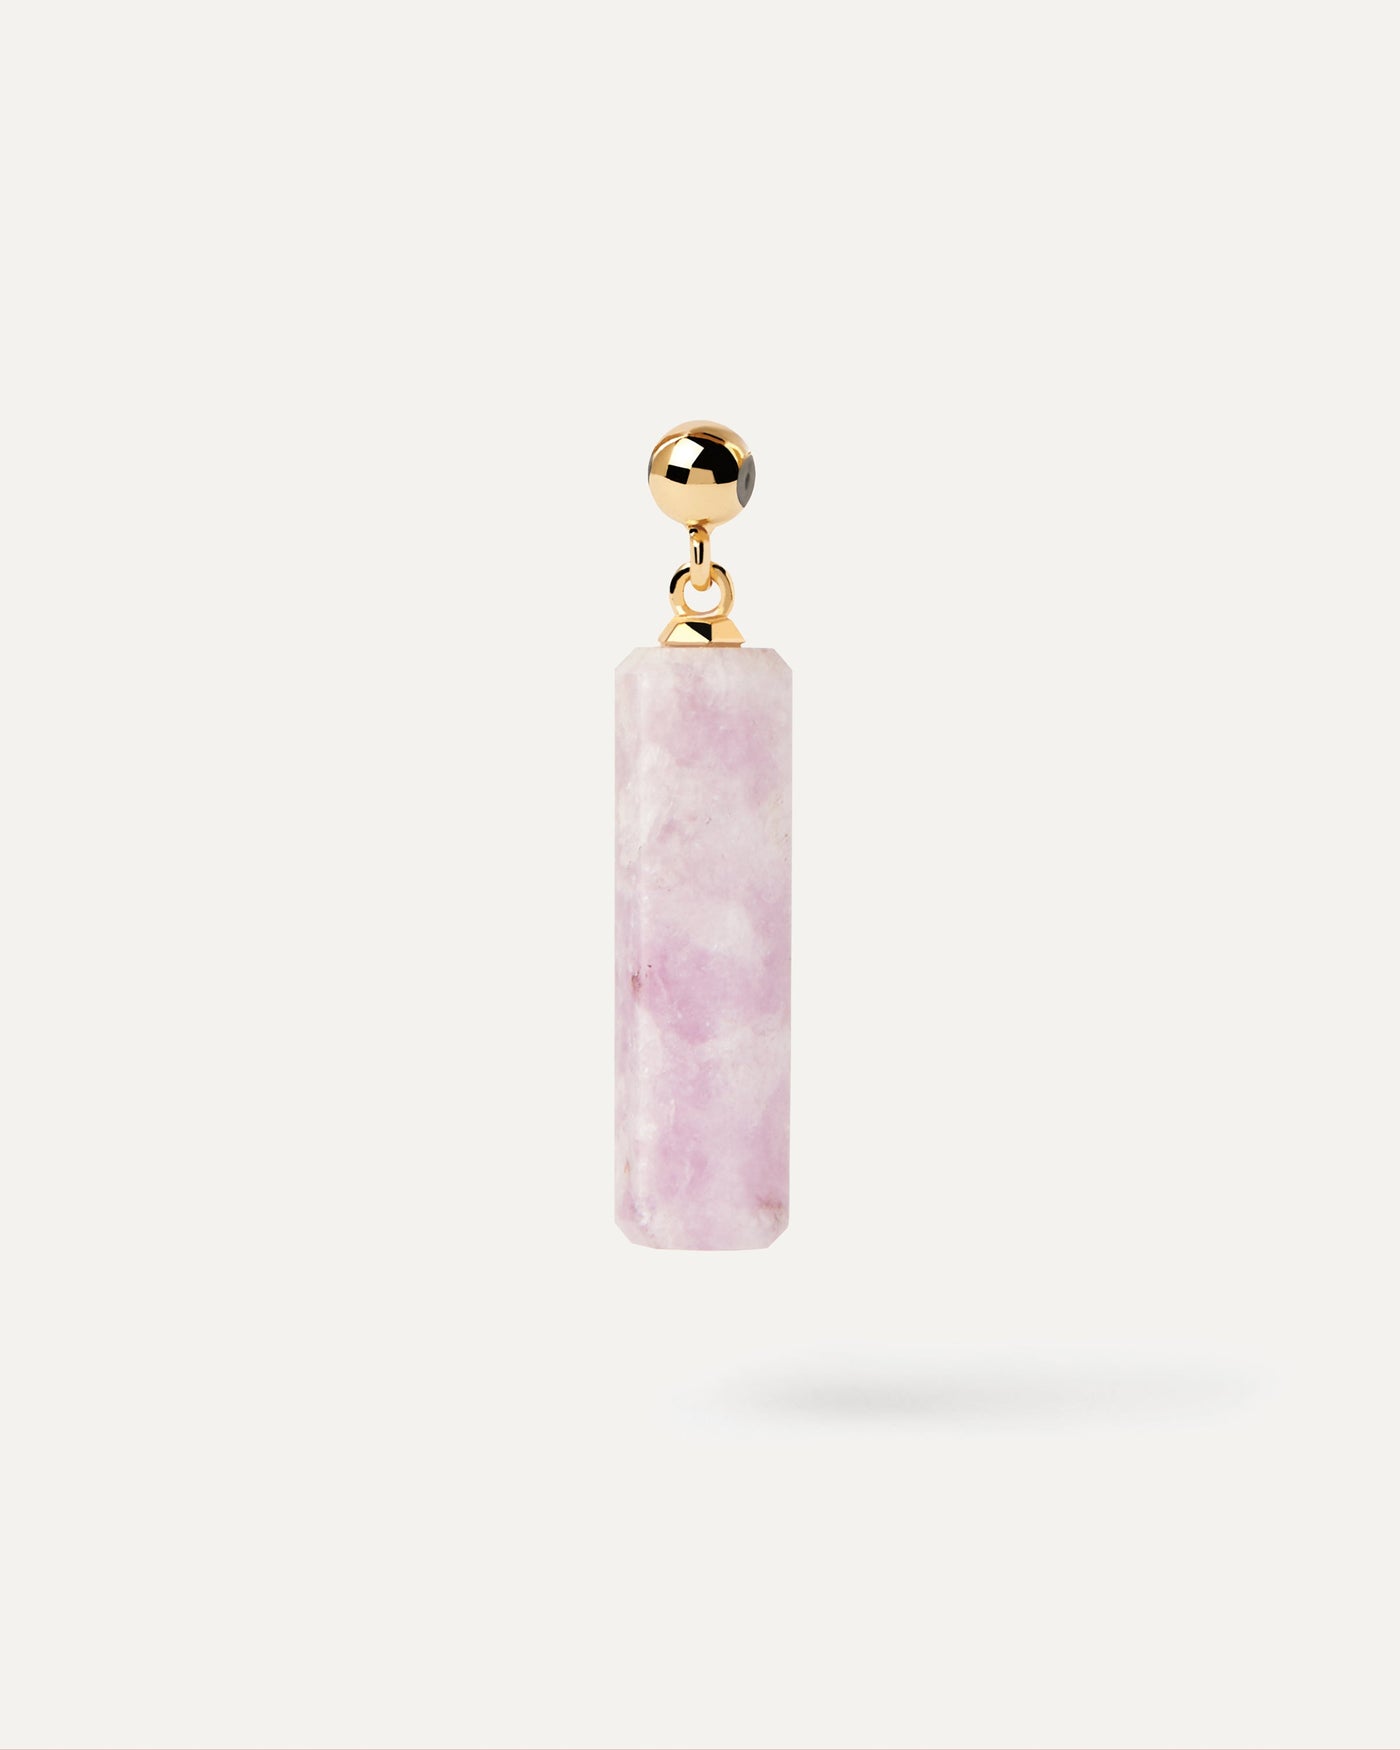 2023 Selection | Quartzite Charm. Get the latest arrival from PDPAOLA. Place your order safely and get this Best Seller. Free Shipping.